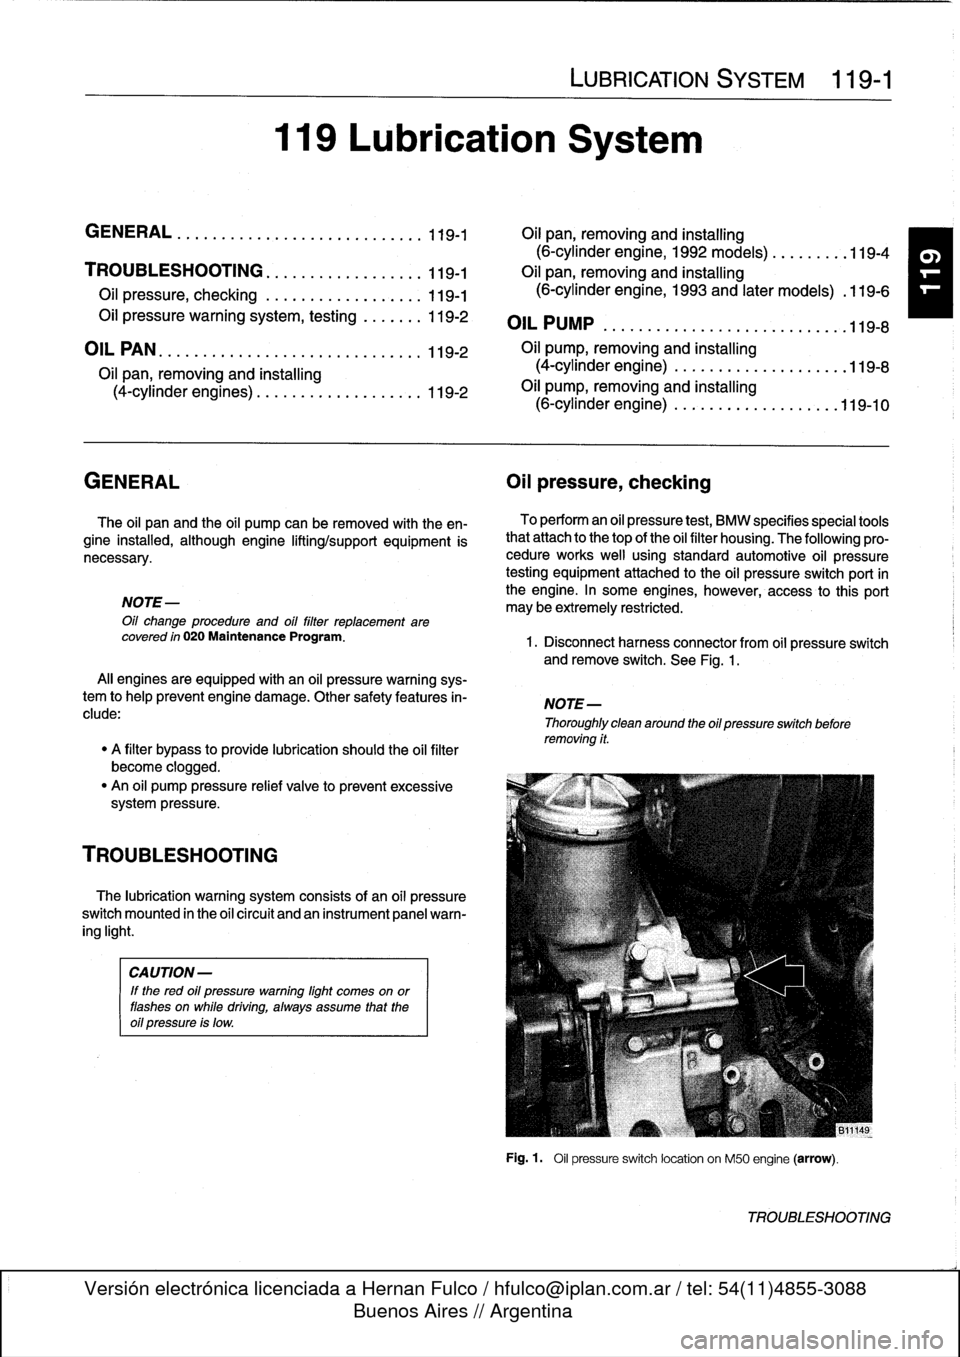 BMW 318i 1997 E36 User Guide 
119
Lubrication
System

LUBRICATION
SYSTEM

	

119-1

GENERAL
.
.
.
.
.
.
...
.
.
.
.
.
.
.
...,
,
...
.
.
.
.
119-1

	

OH
pan,
removing
and
installing

(6-cylinder
engine,
1992
models)
.
.
.
.
.
.
